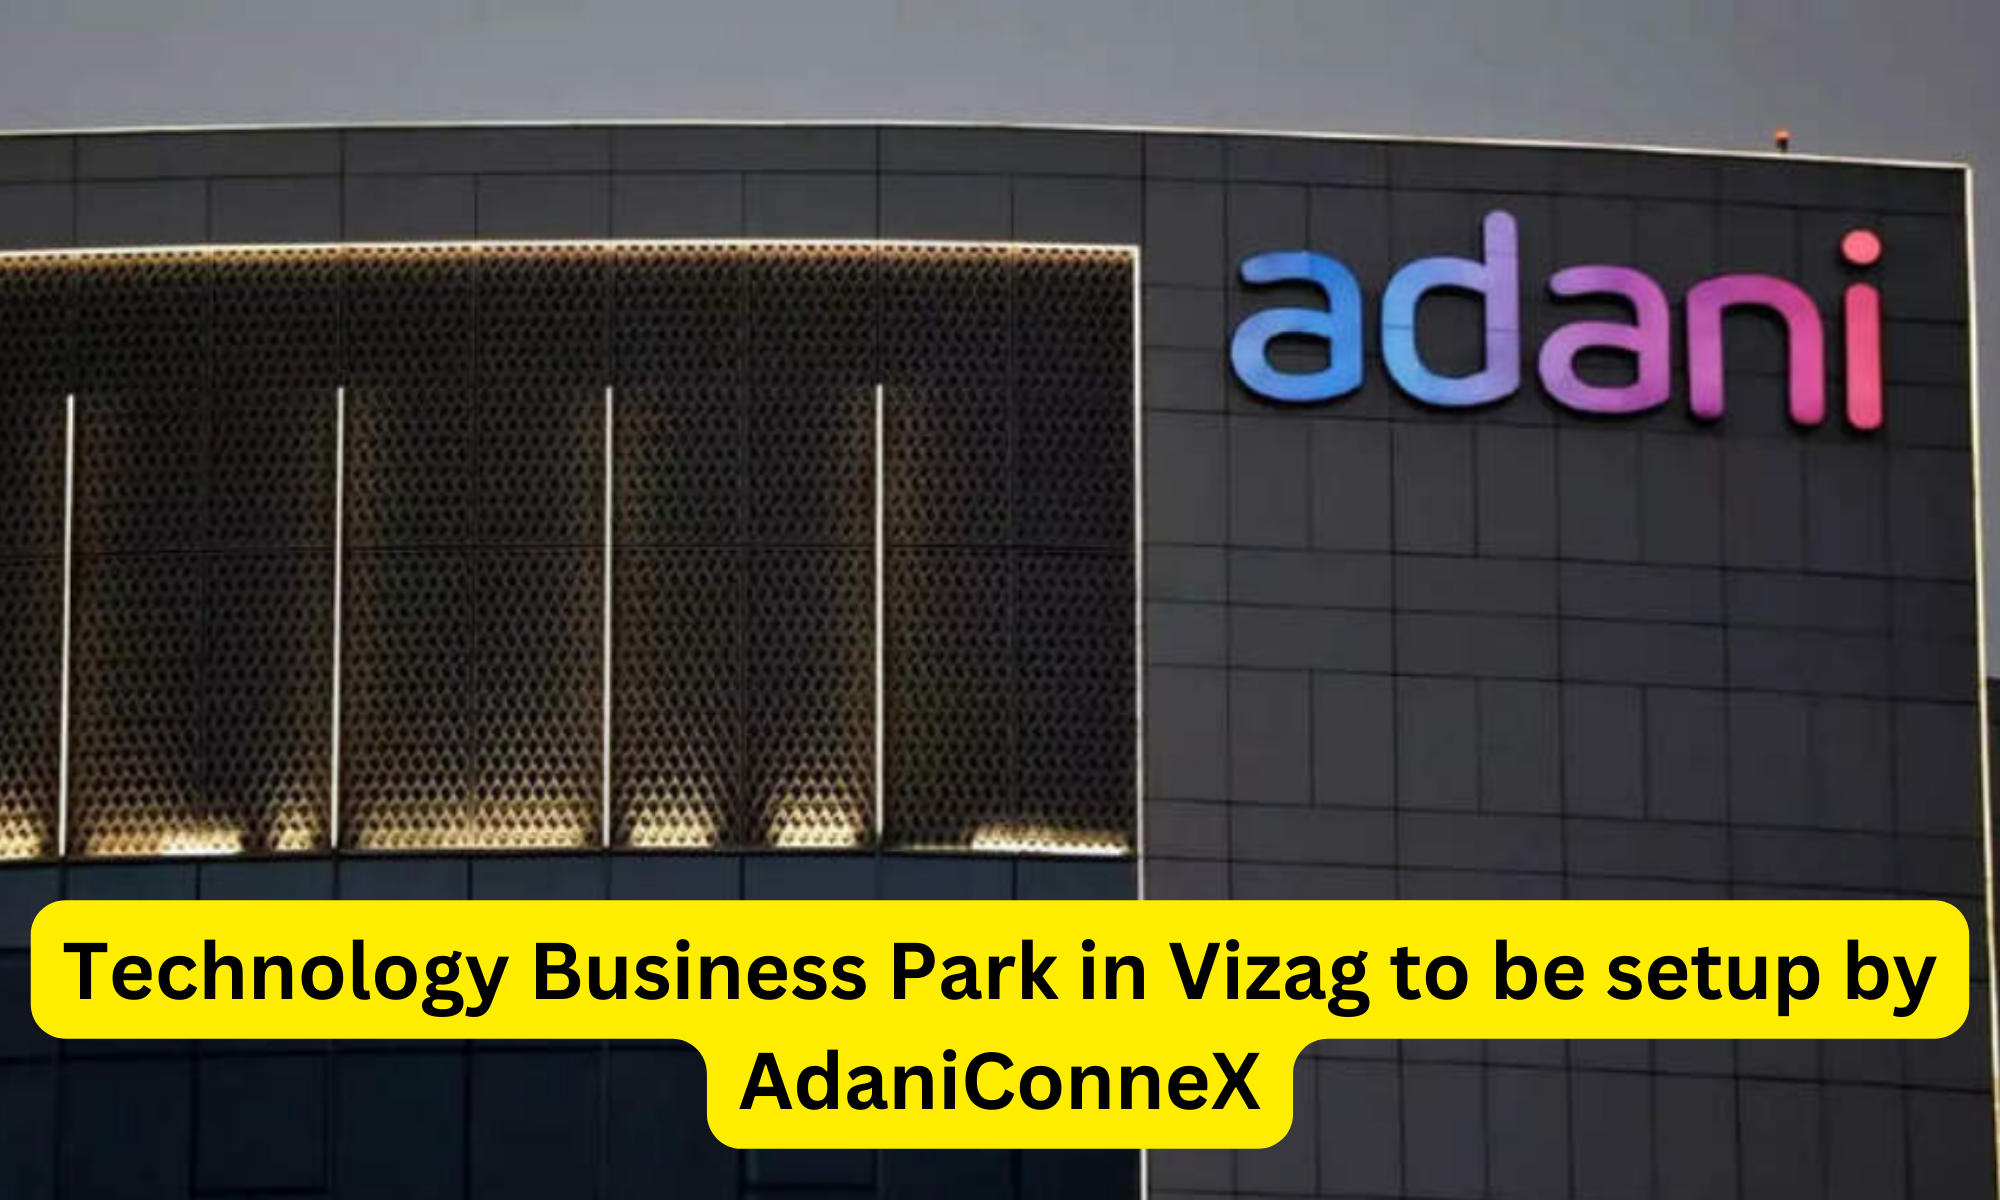 Technology Business Park in Vizag to be setup by AdaniConneX